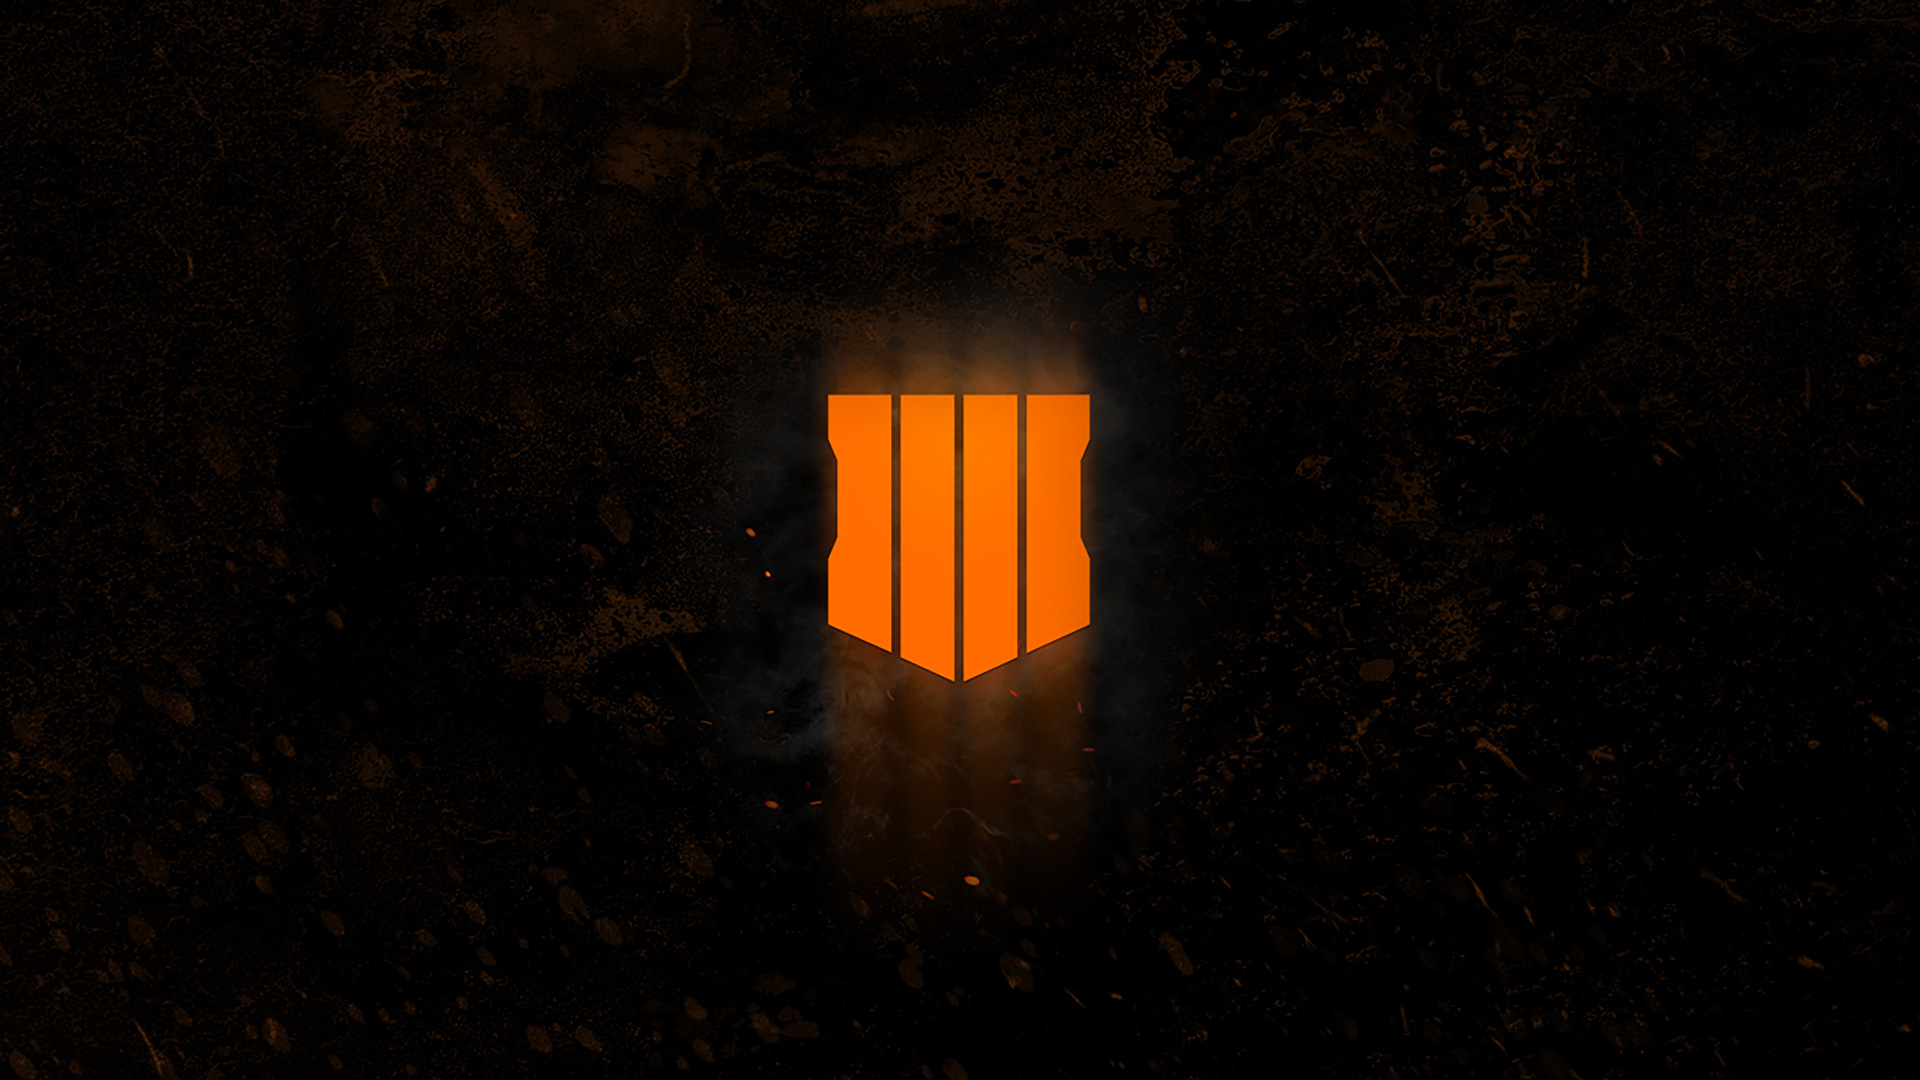 call of duty black ops 4 android download